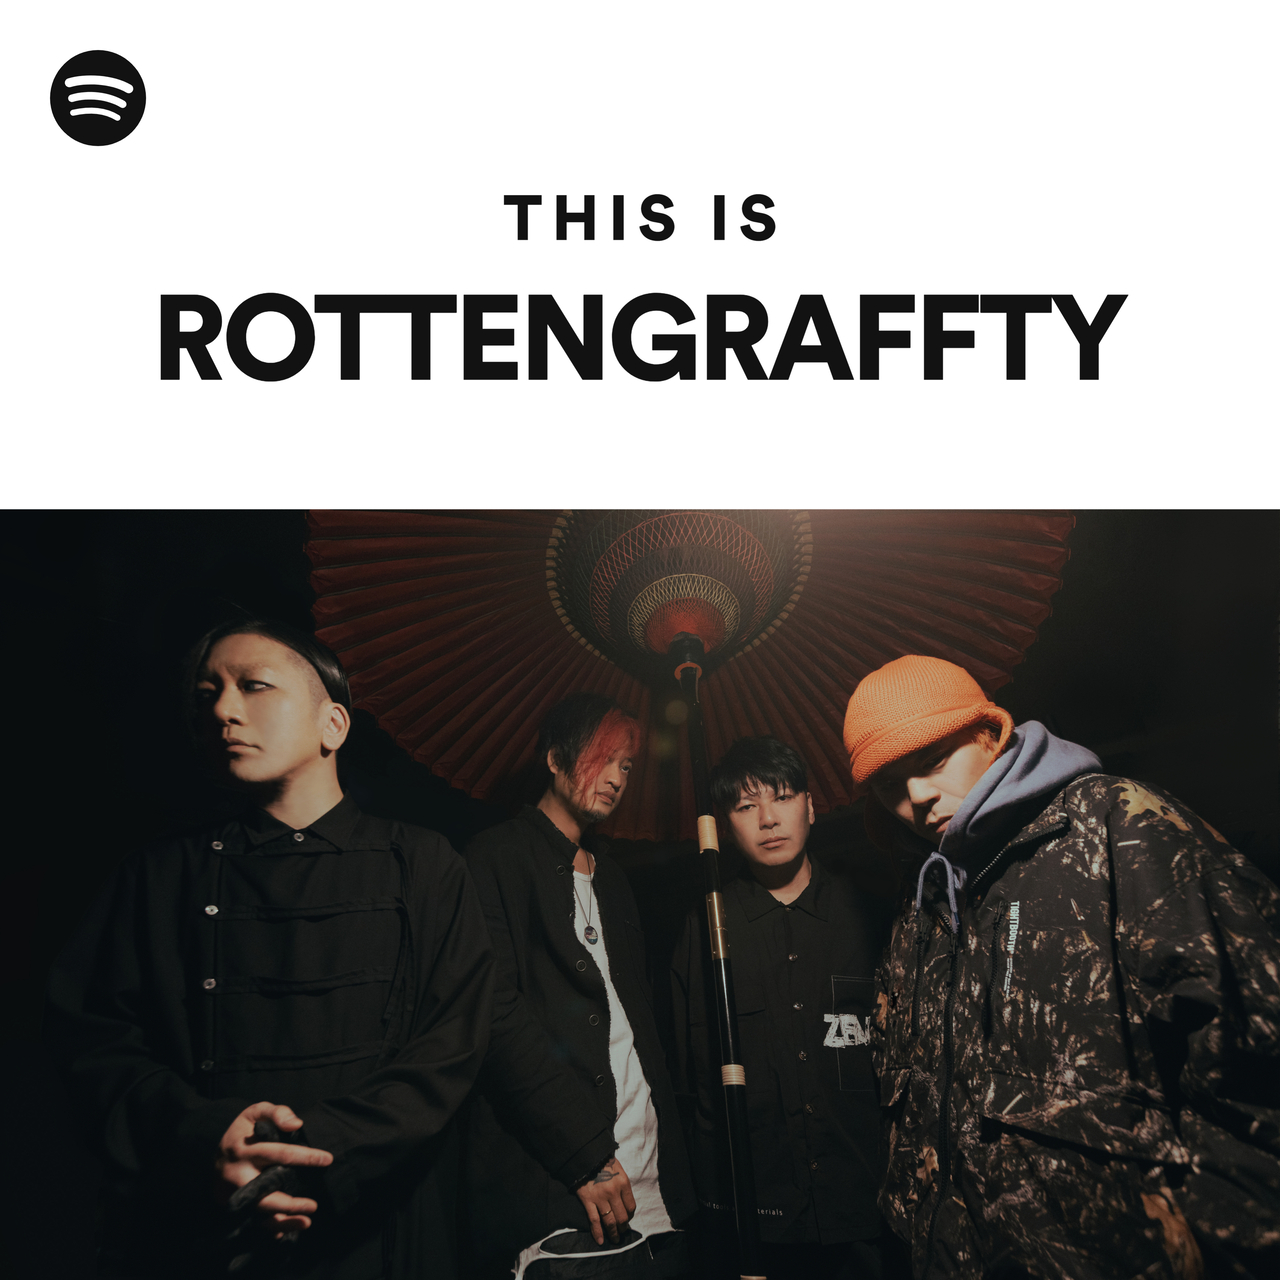 This Is ROTTENGRAFFTY - playlist by Spotify | Spotify